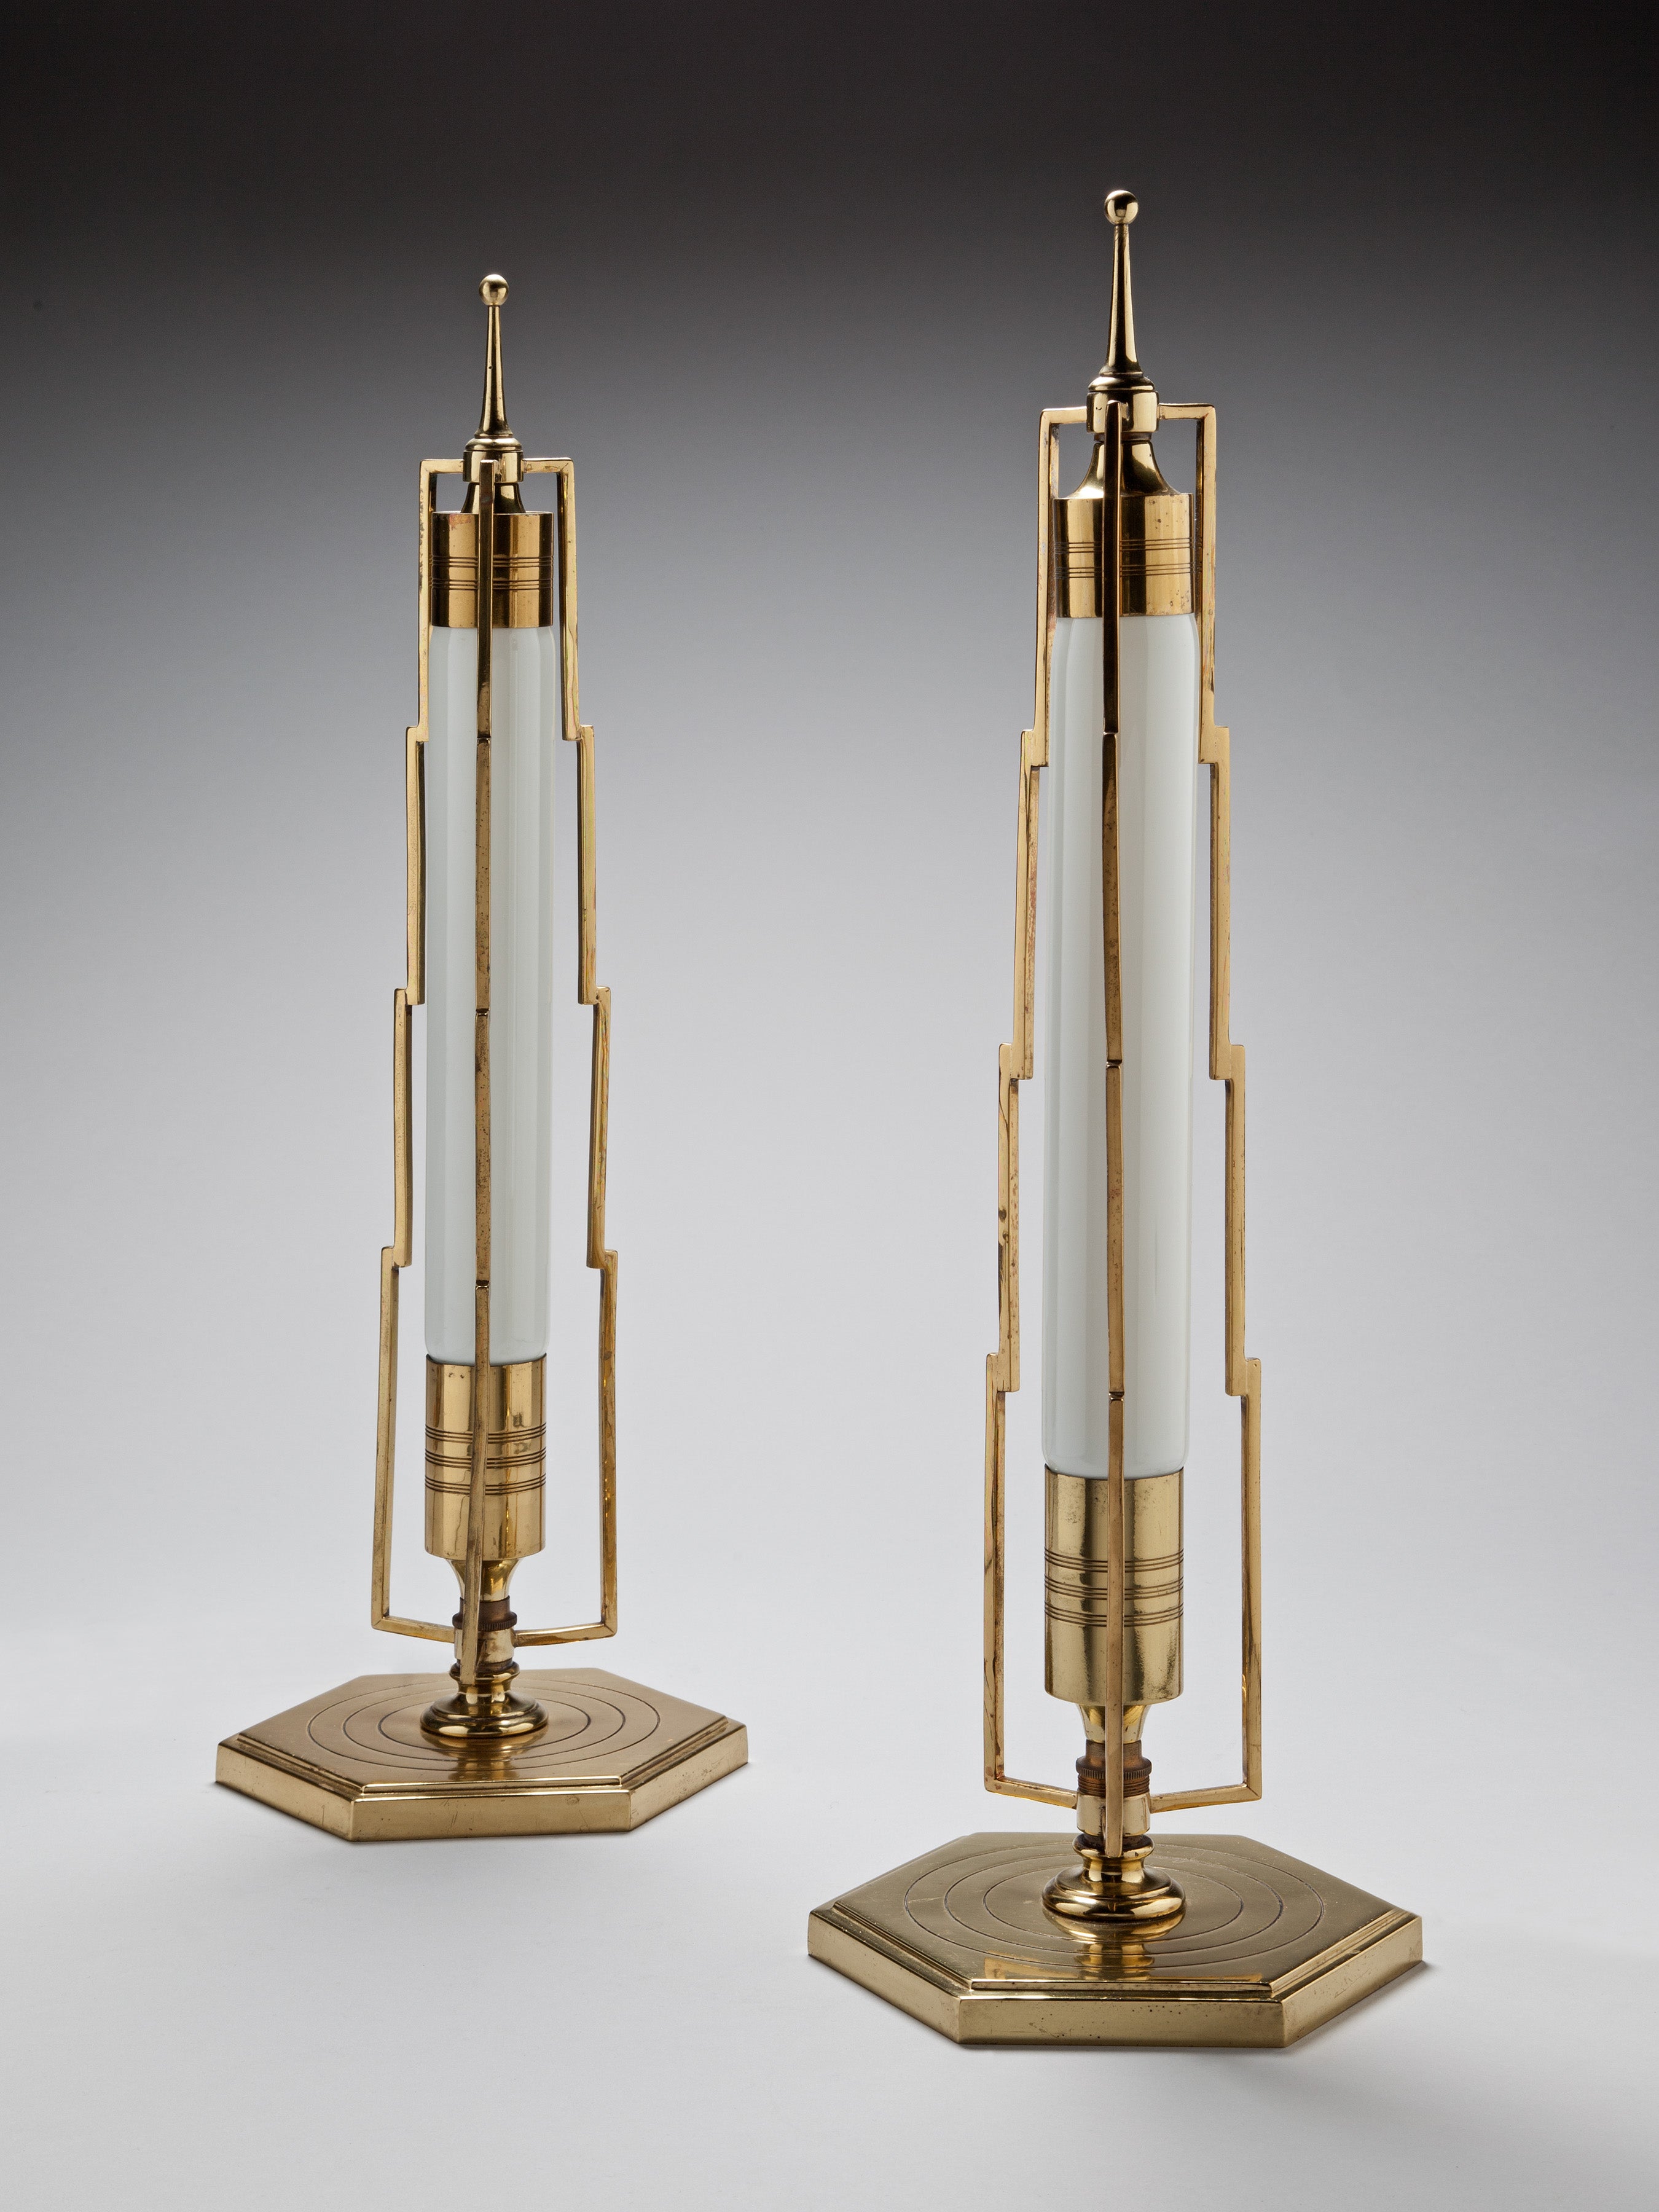 Pair of Art Deco Table Lamps For Sale